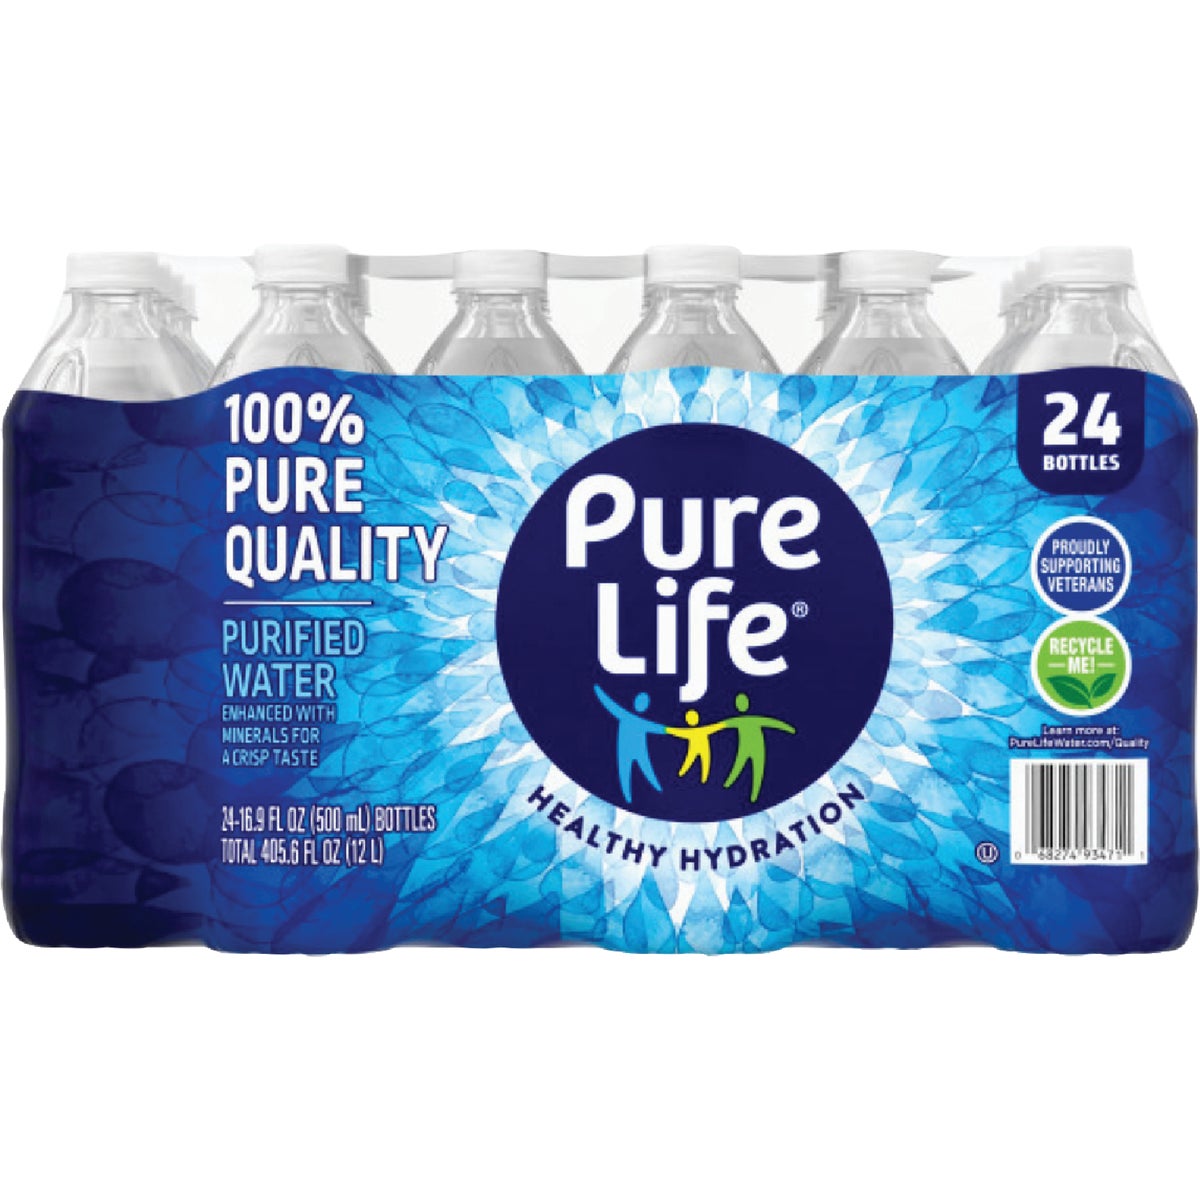 Item 973076, Purified water enhanced with a blend of minerals, and is an essential part 